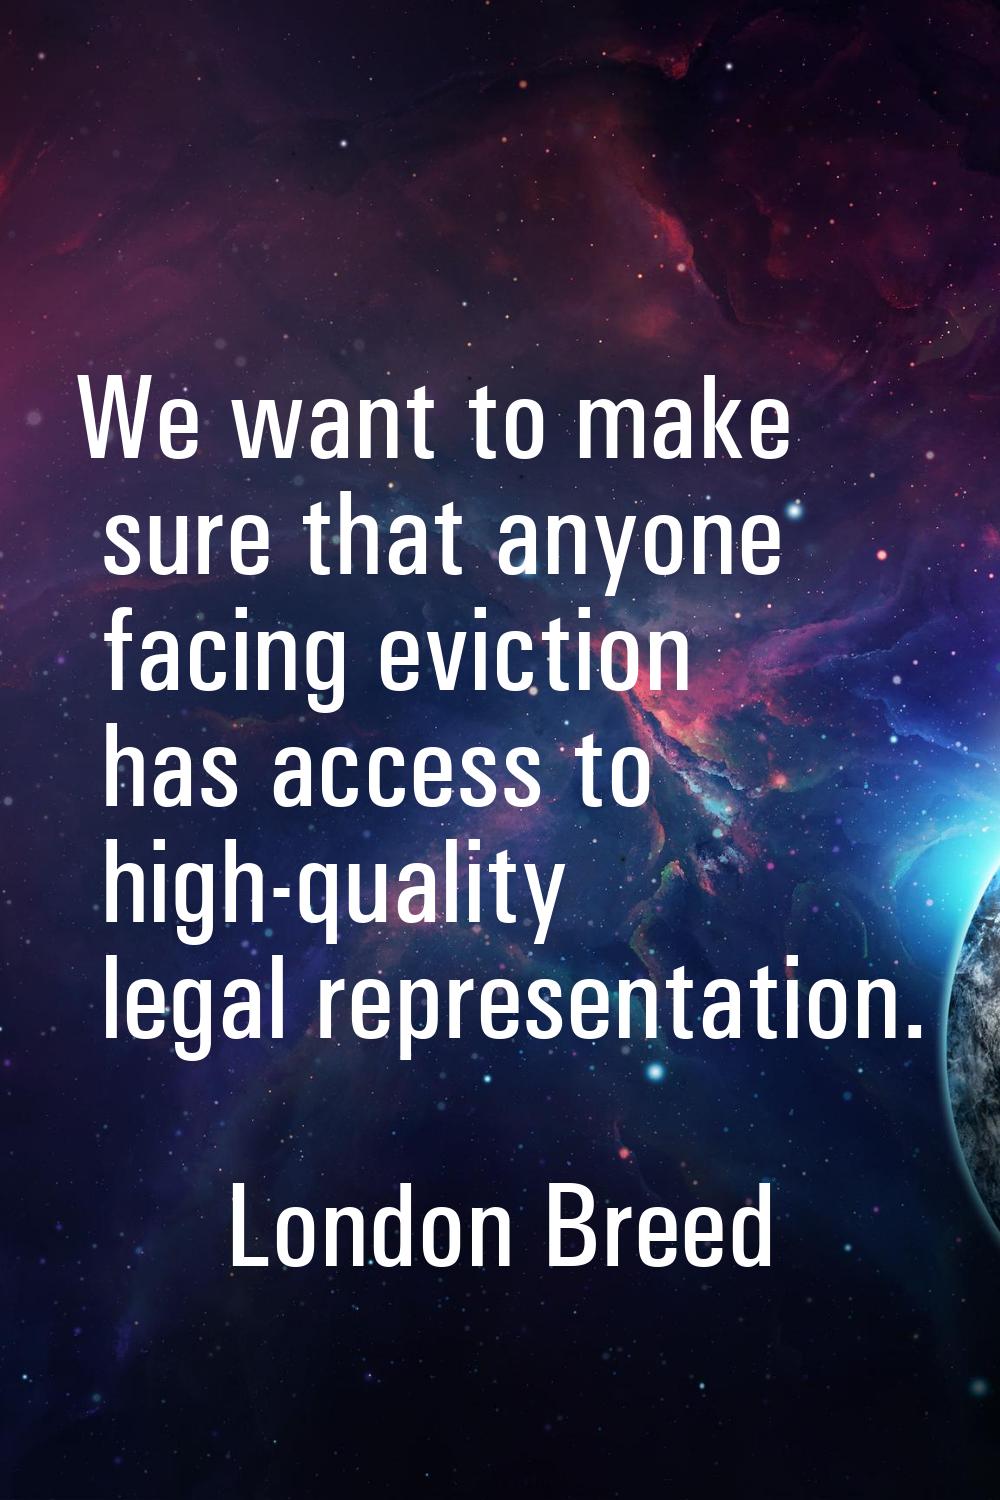 We want to make sure that anyone facing eviction has access to high-quality legal representation.